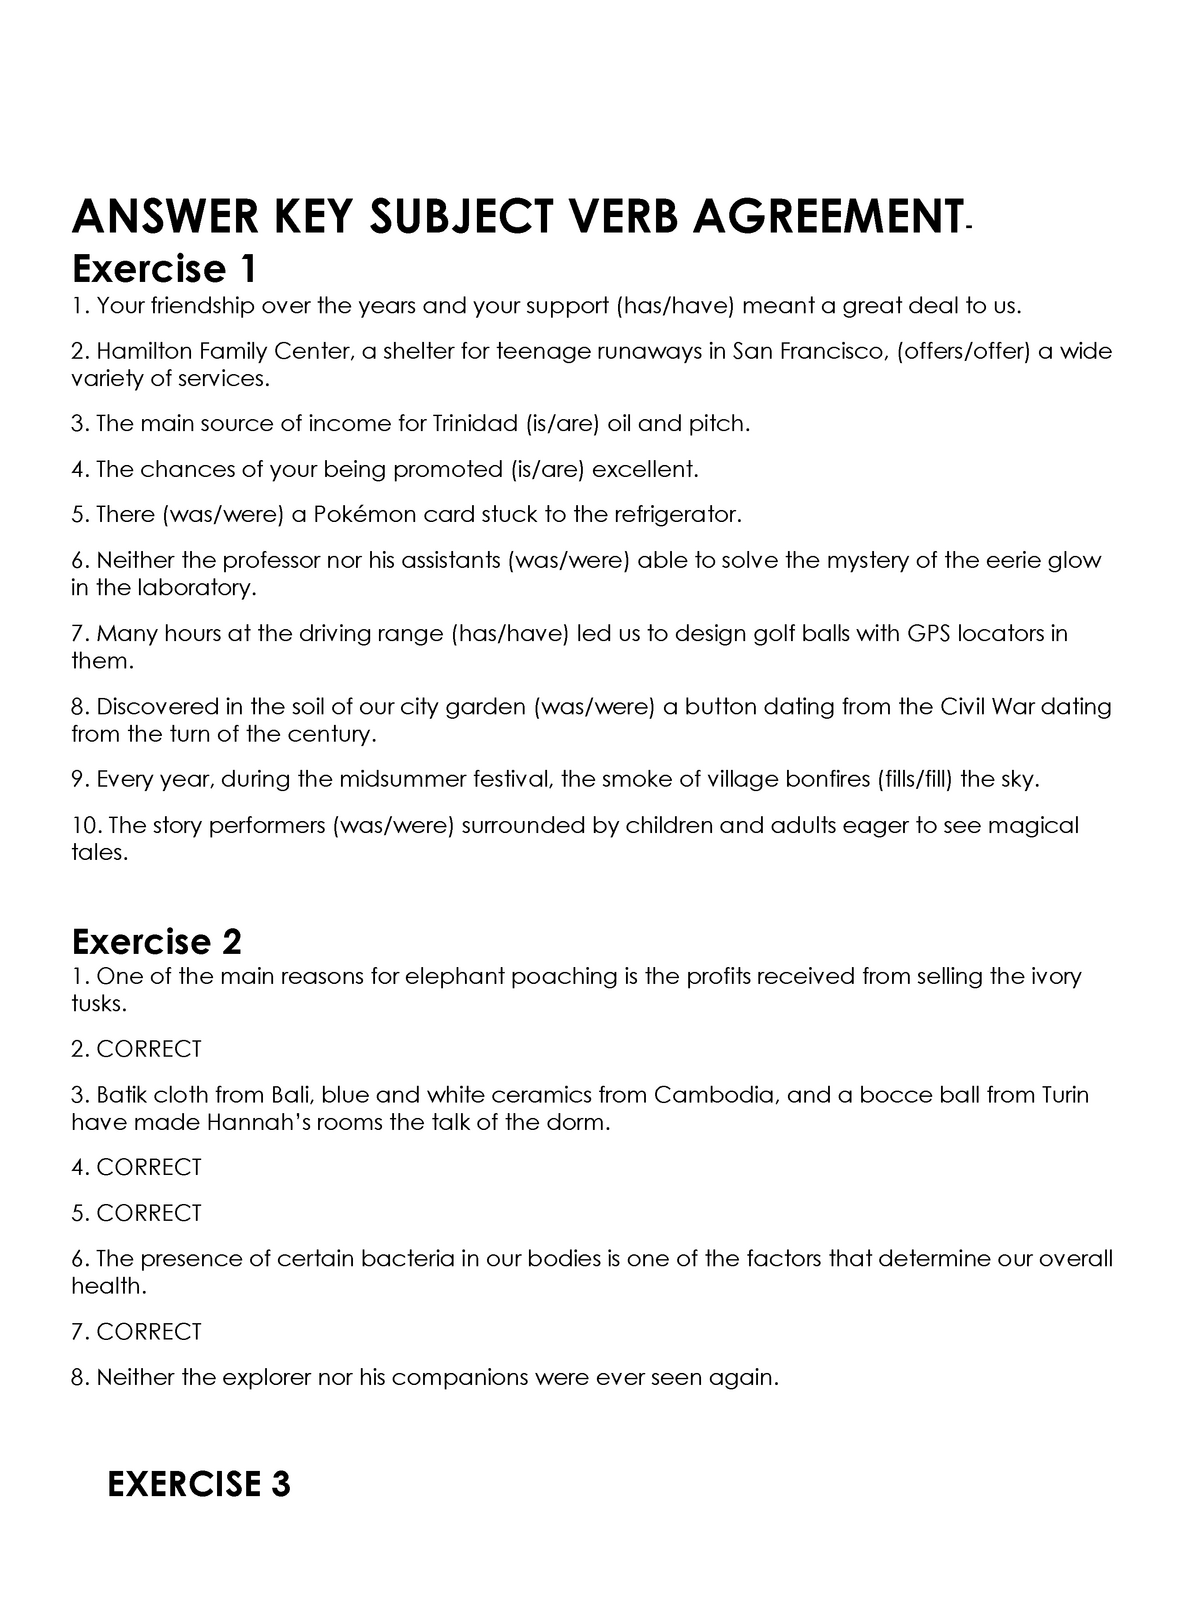 unit-1-answer-key-subject-verb-agreement-answer-key-subject-verb